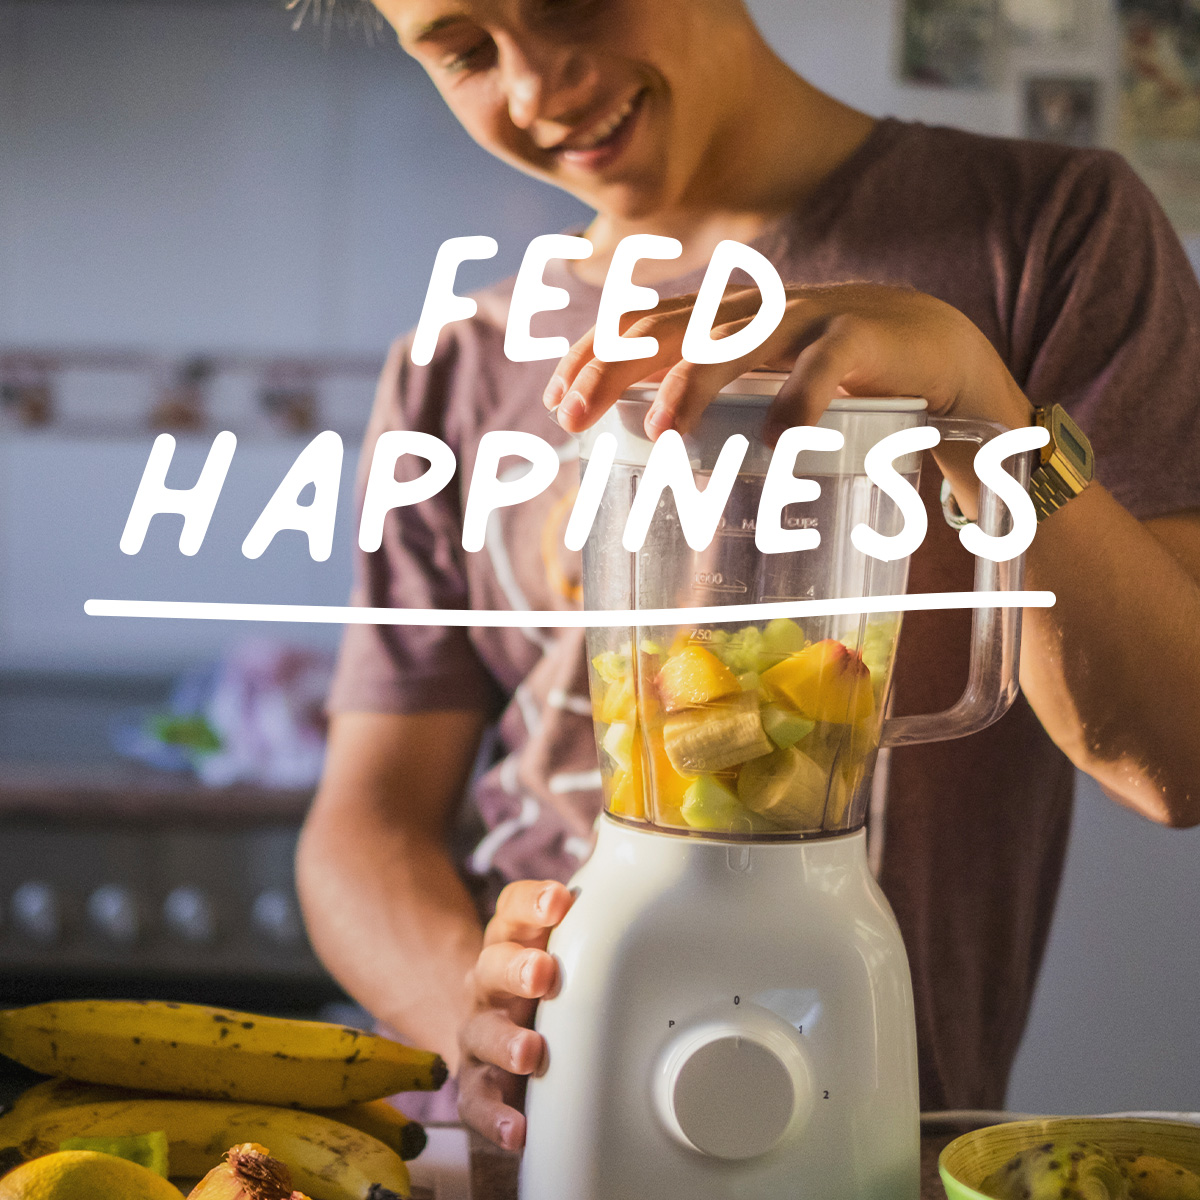 image shows young man using a blender with the words 'feed happiness' overlaying image